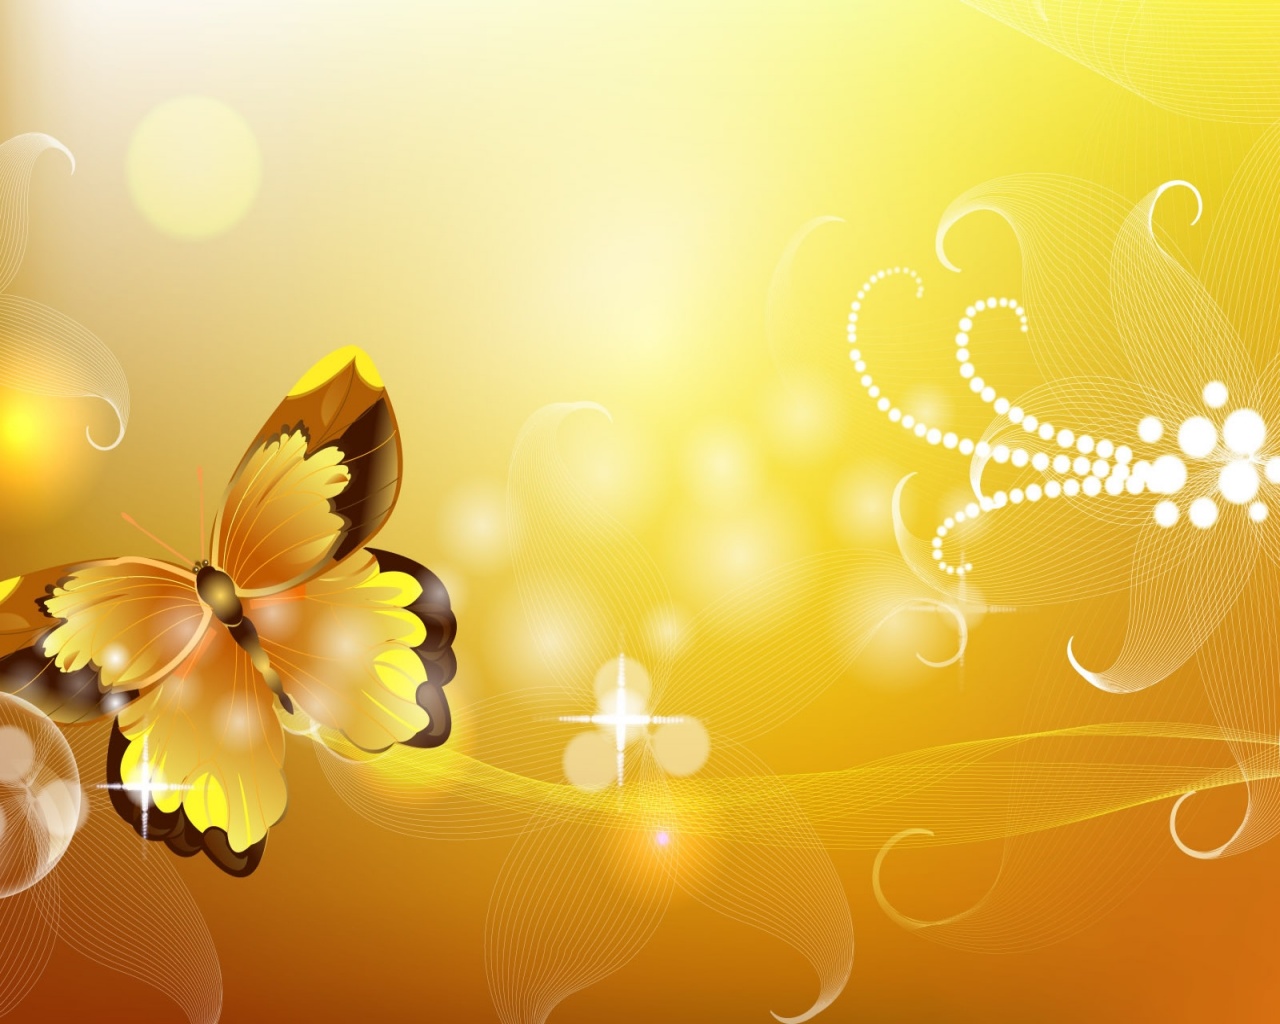 Butterfly orange abstract backgrounds